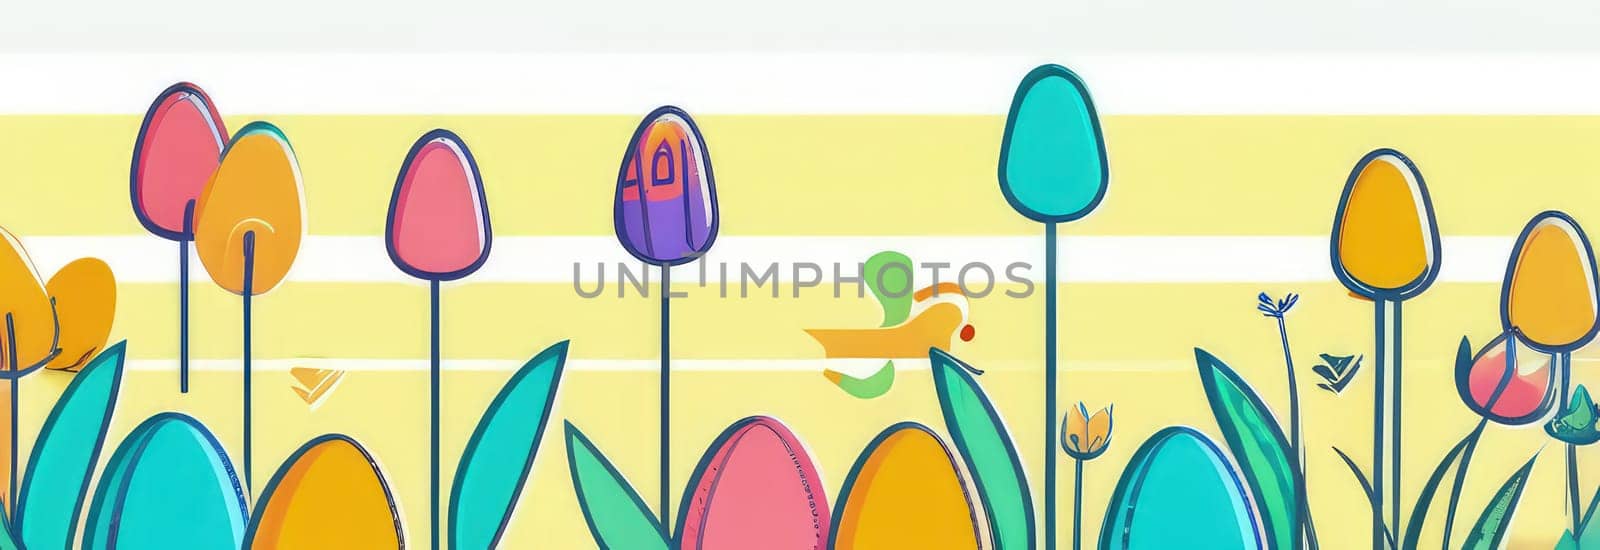 Holiday celebration banner with cute Easter decorated eggs and spring flowers on green spring meadow. Flowers in landscape. Happy Easter greeting card, banner, festive background.Copy space